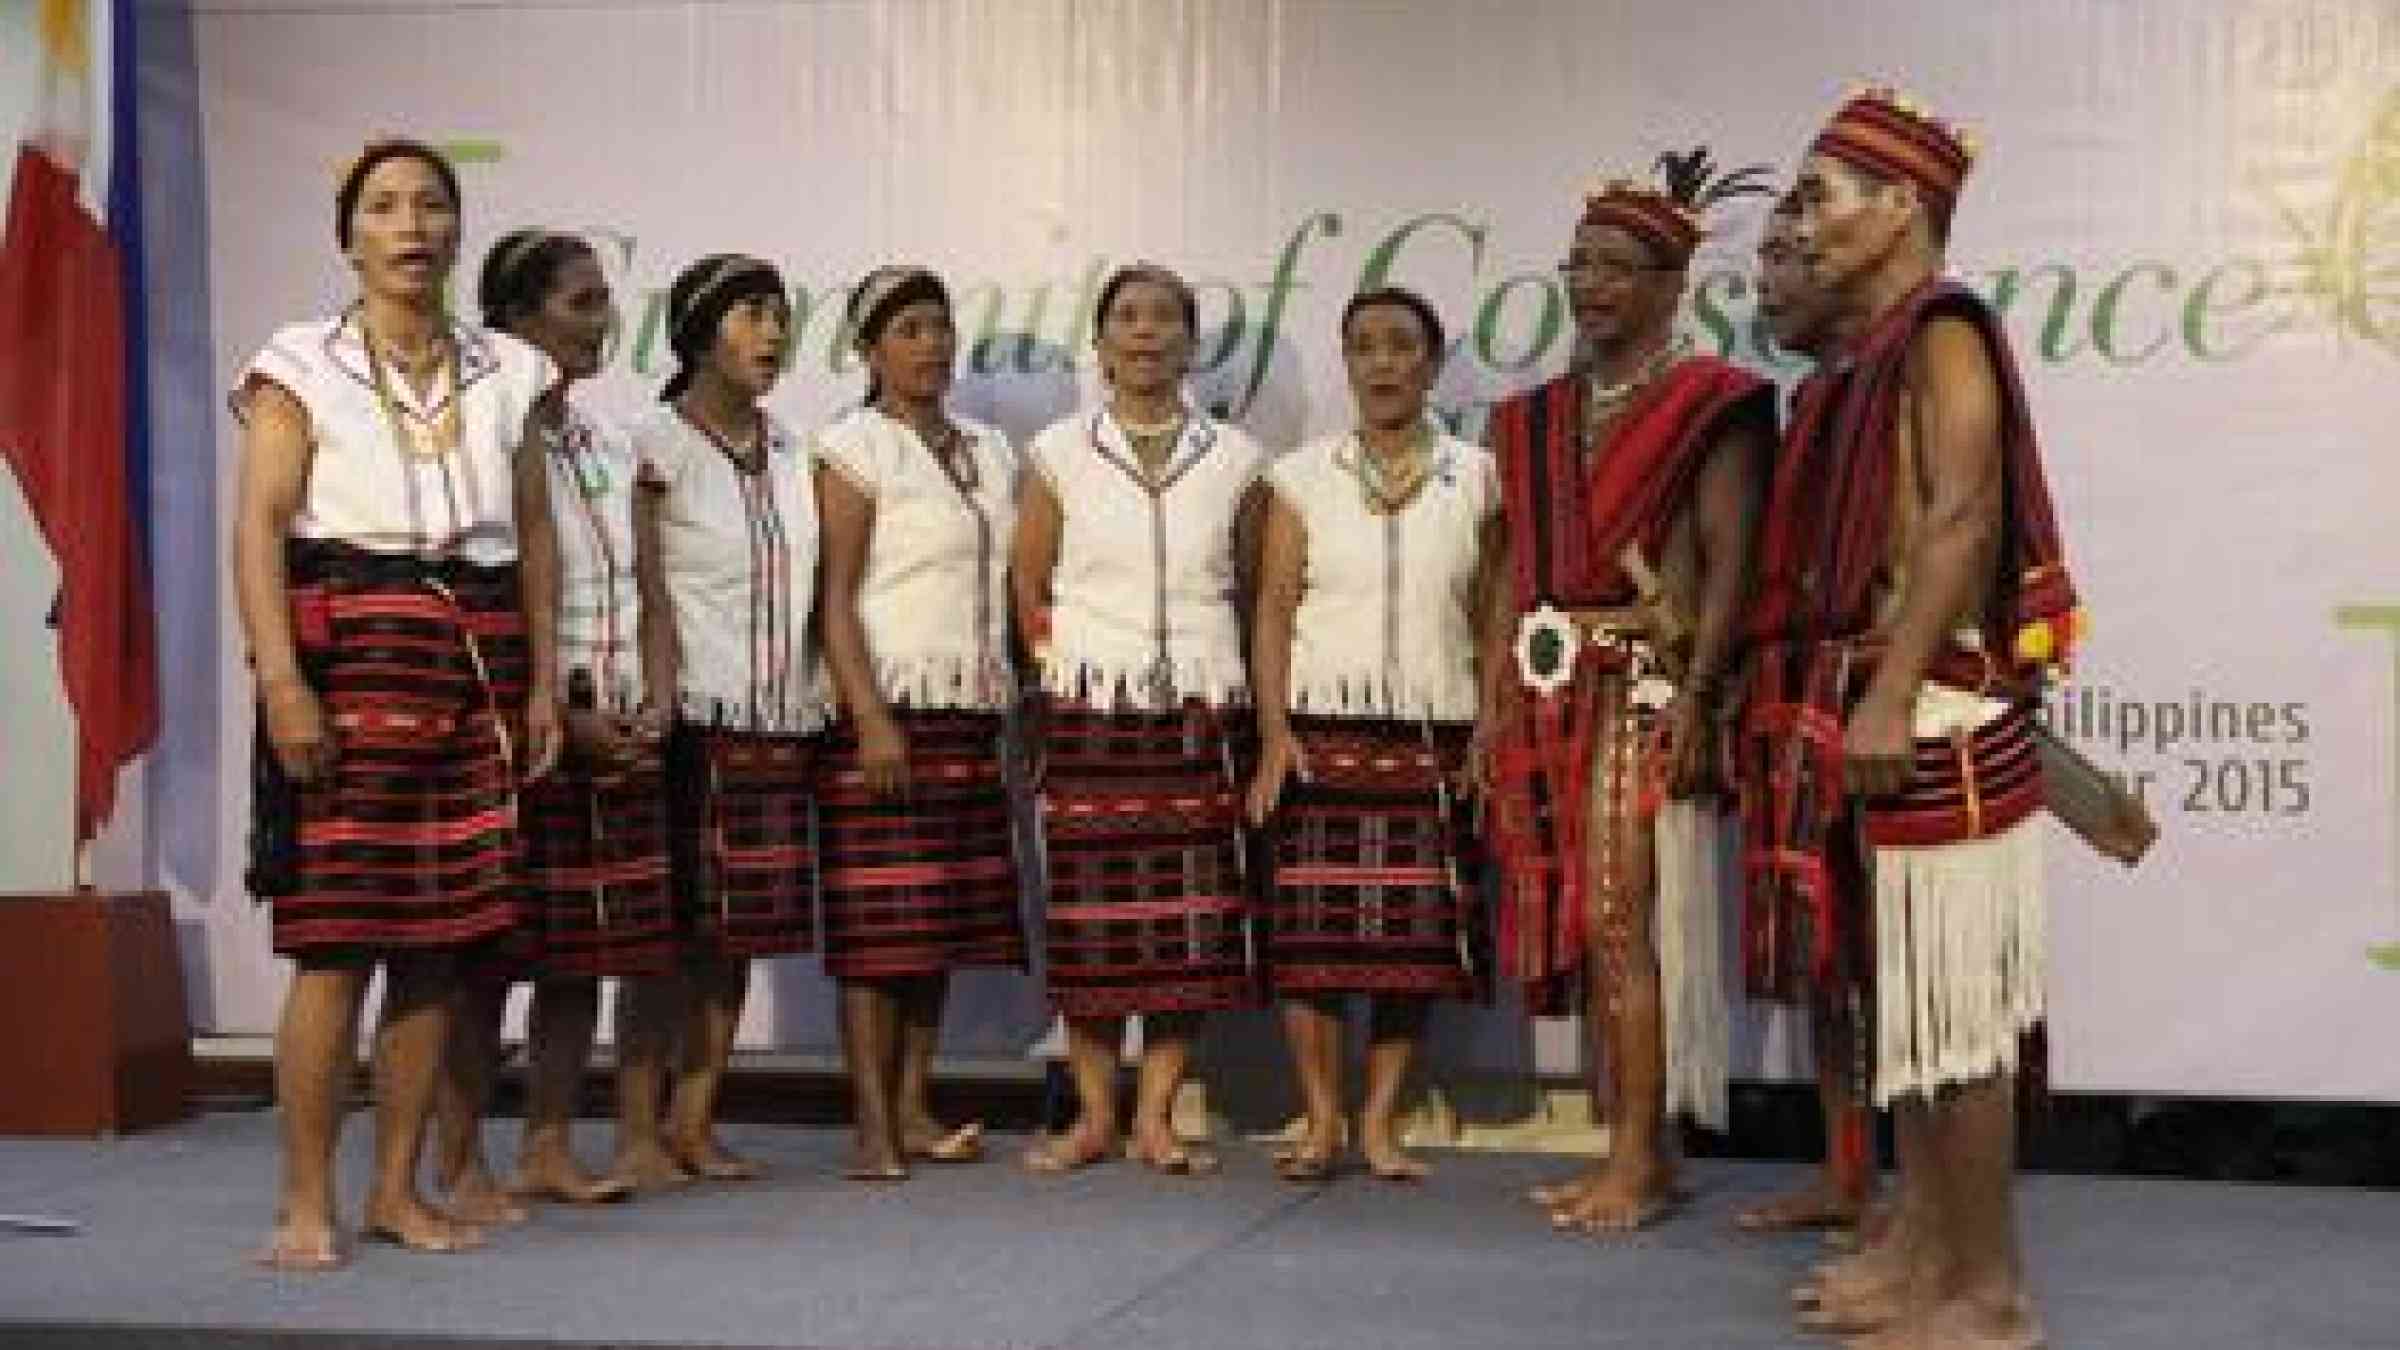 Members of the Ifugao tribe who were honoured today at a special ceremony in the Philippines Senate. (Photo: UNISDR)